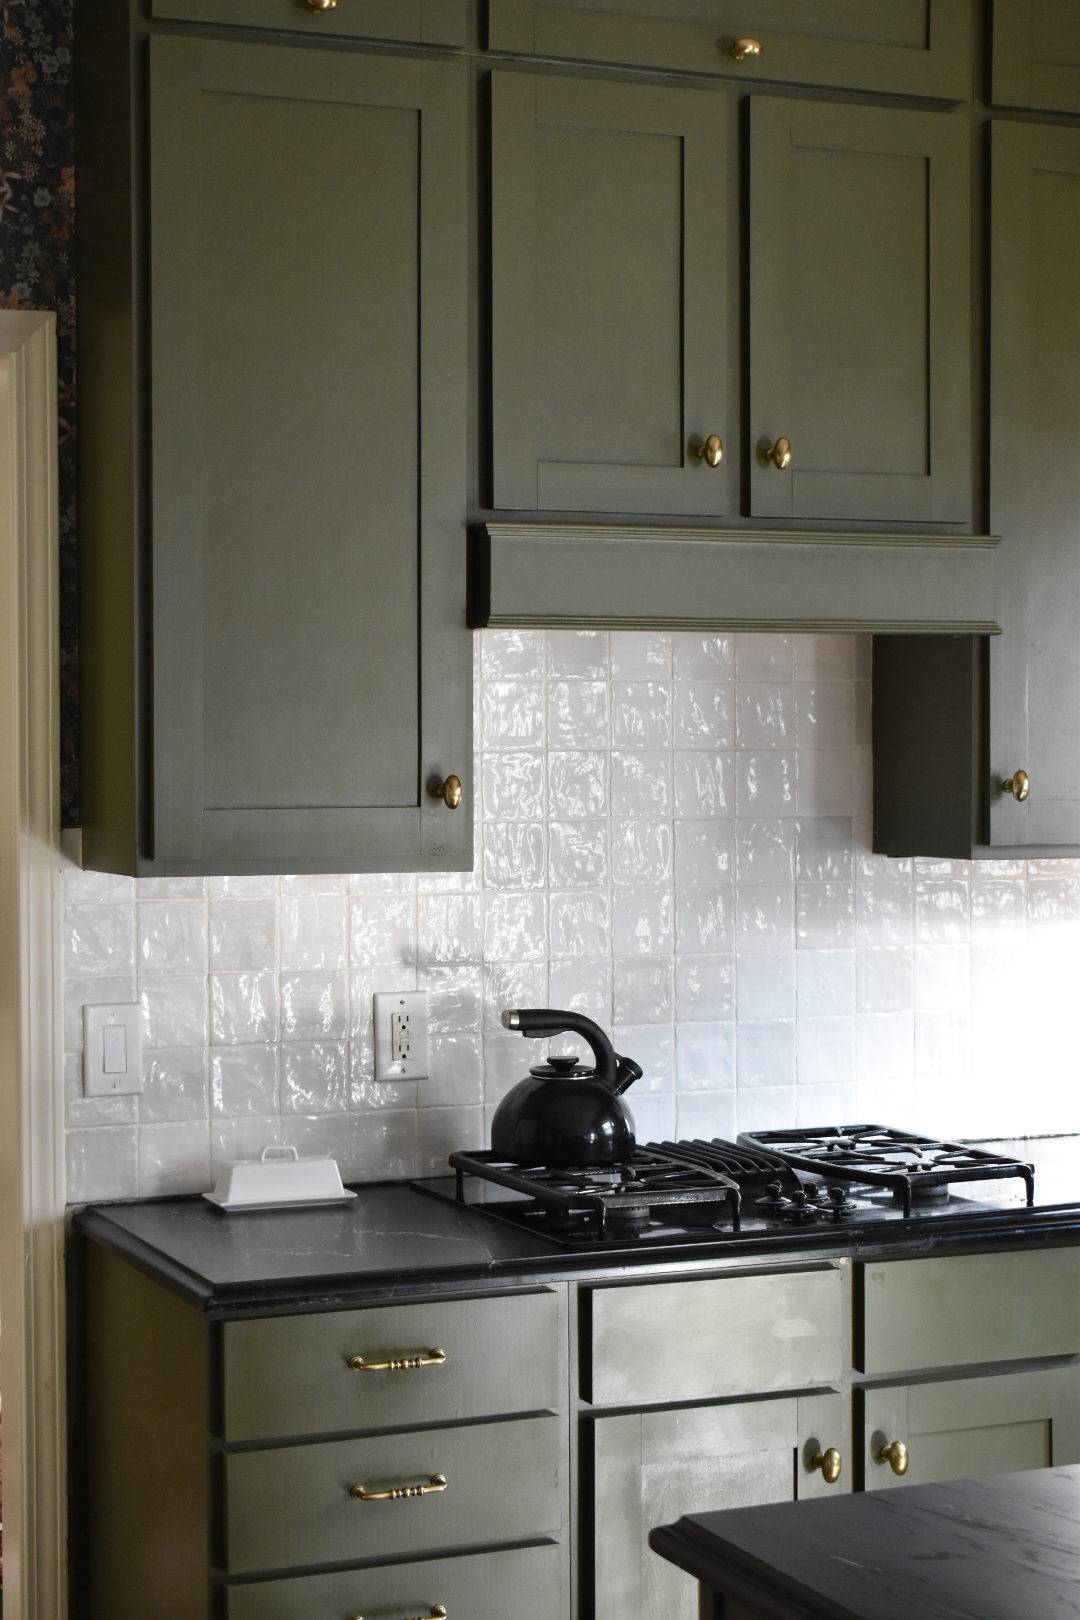 Moody kitchen with olive green cabinetry and white handmade-look tiled backsplash